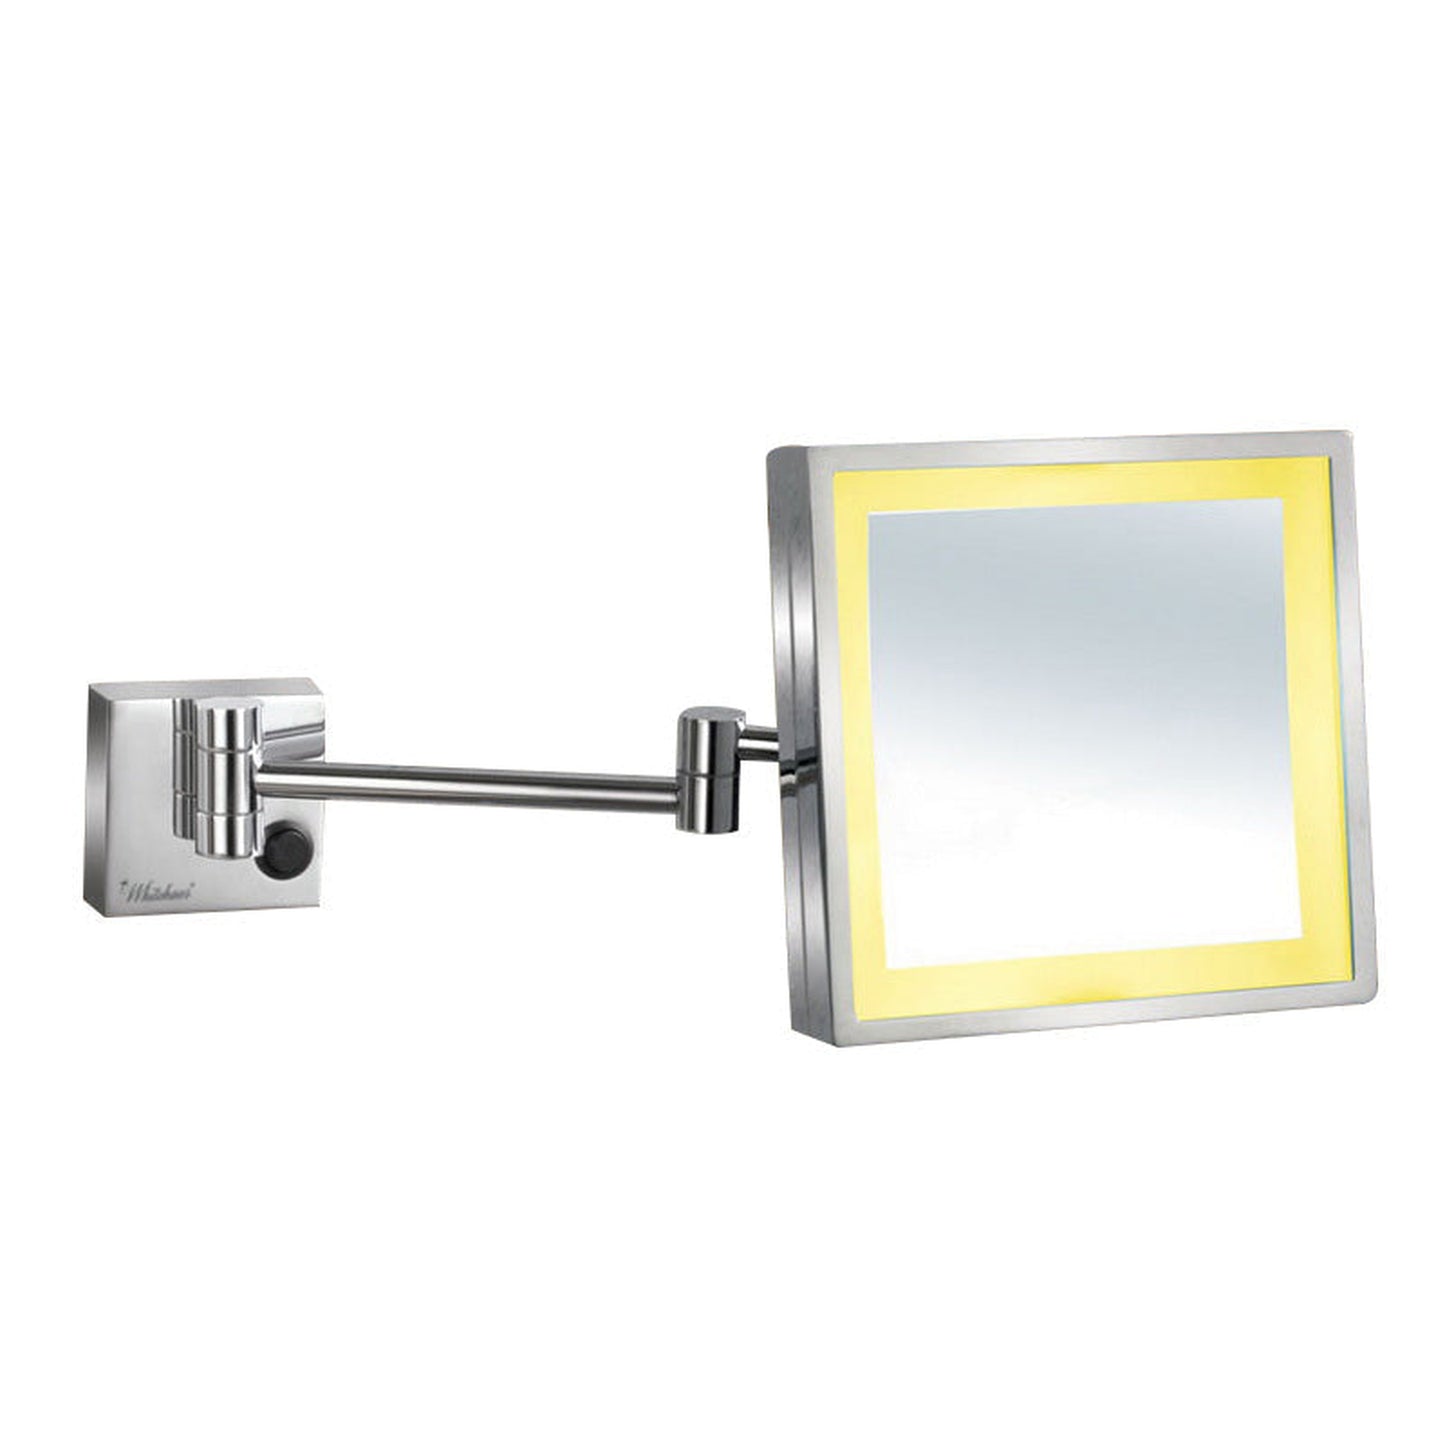 Whitehaus WHMR25-C Polished Chrome Square Wall Mount Led 5X Magnified Mirror